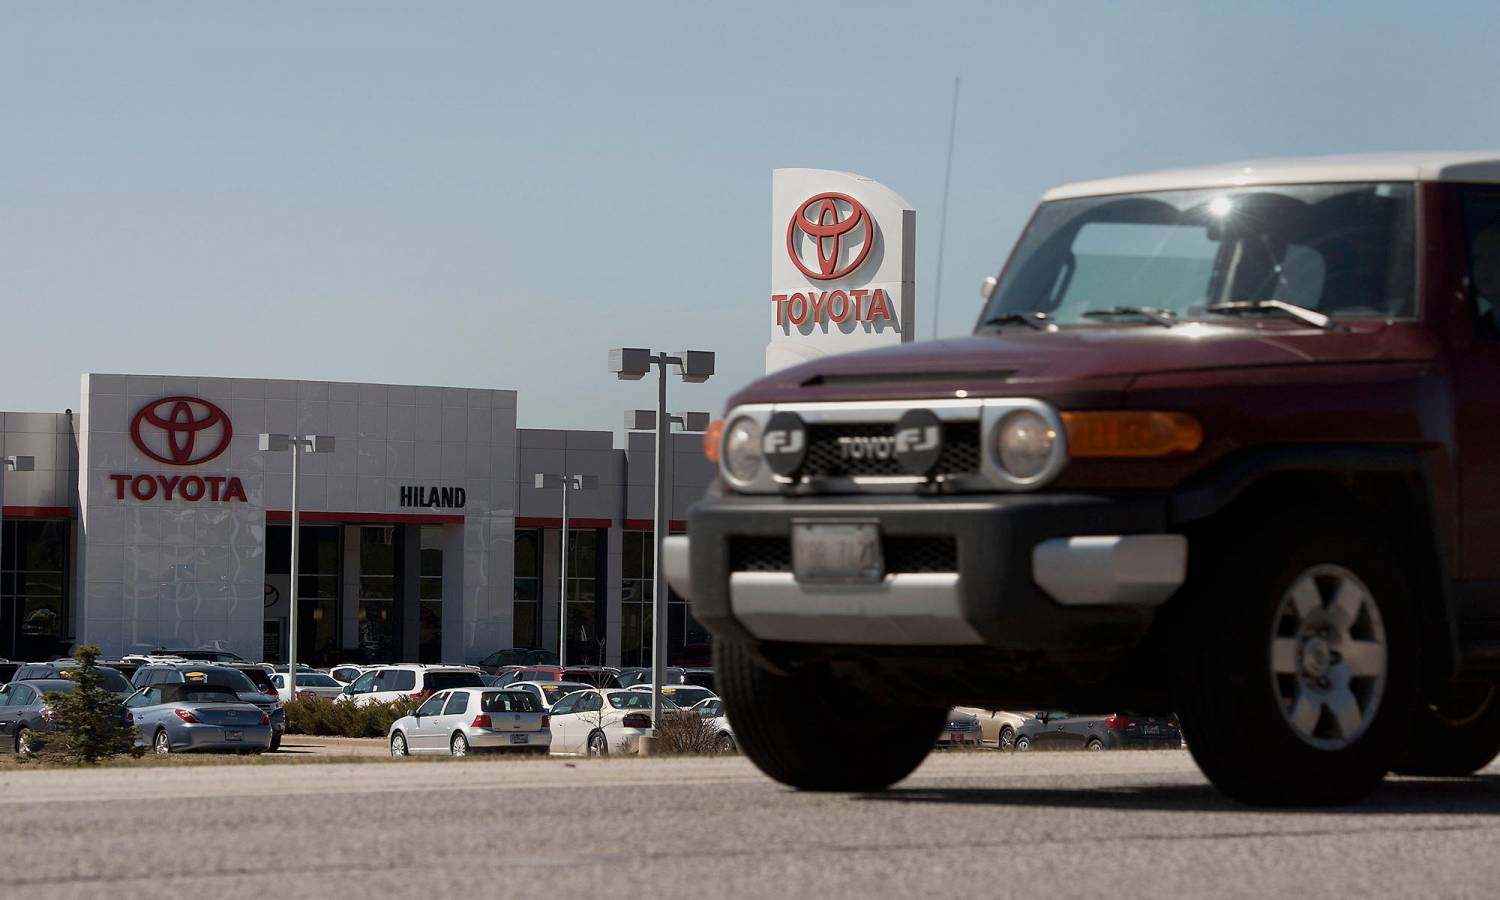 Toyota dreams of green car future, but light-truck gains are driving profits